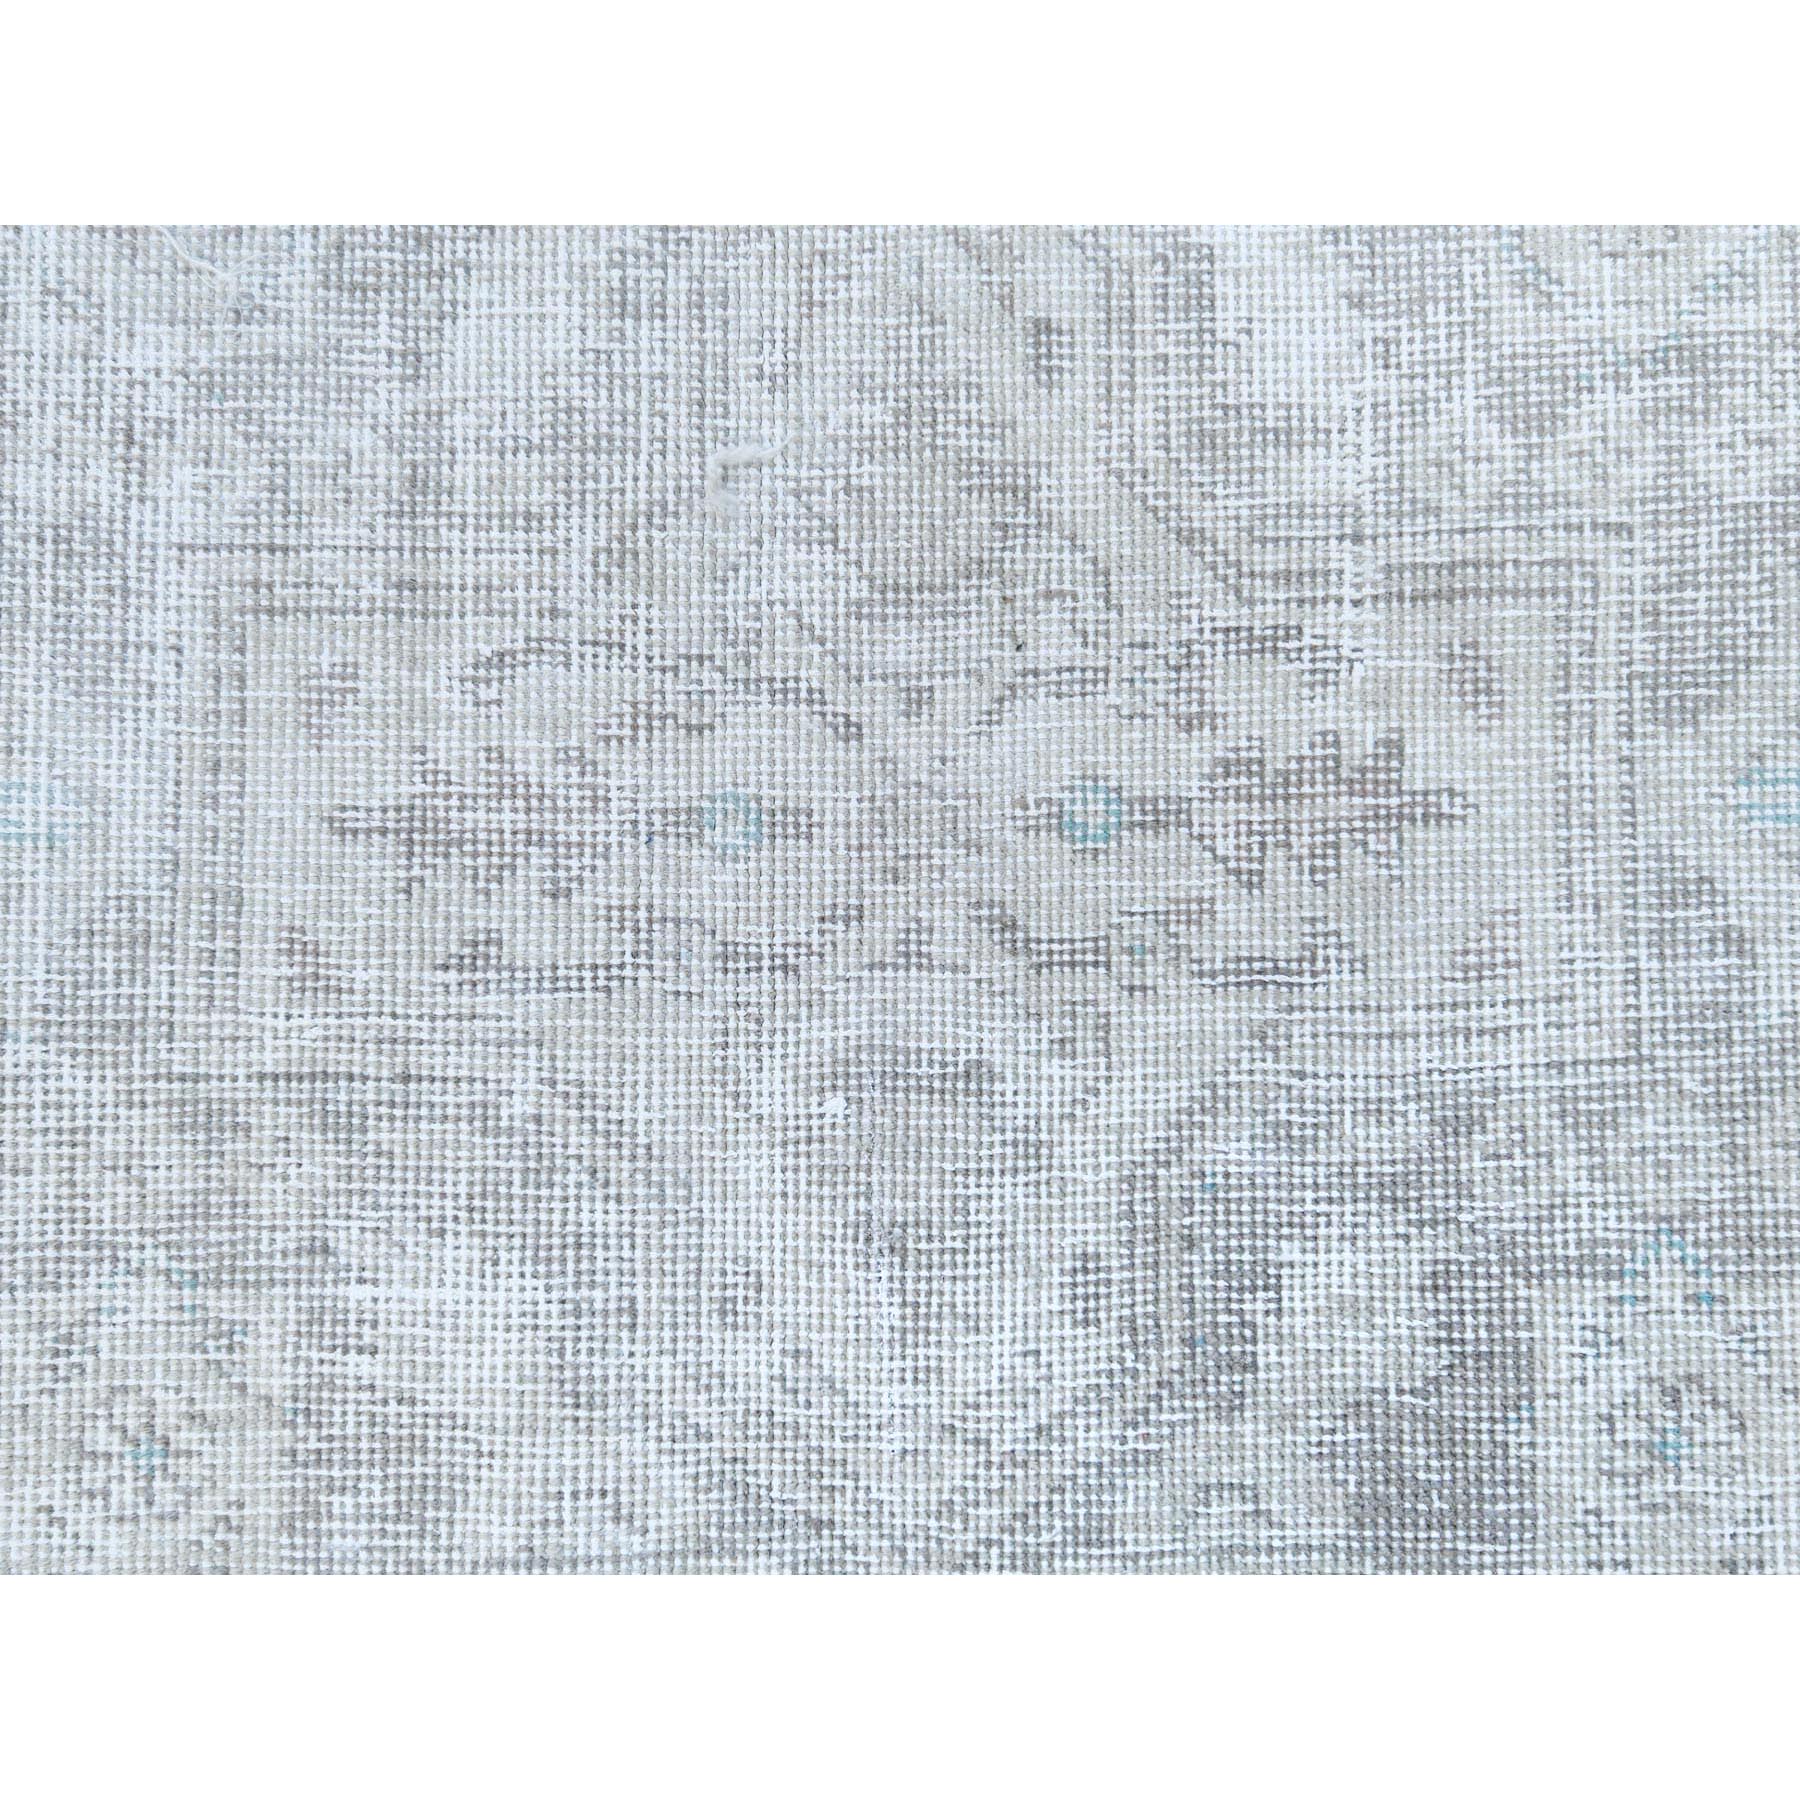 8'1"x10'9" Beige Shabby Chic Vintage Persian Tabriz Hand Woven Worn Wool, Cropped Thin, Distressed Look Oriental Rug 